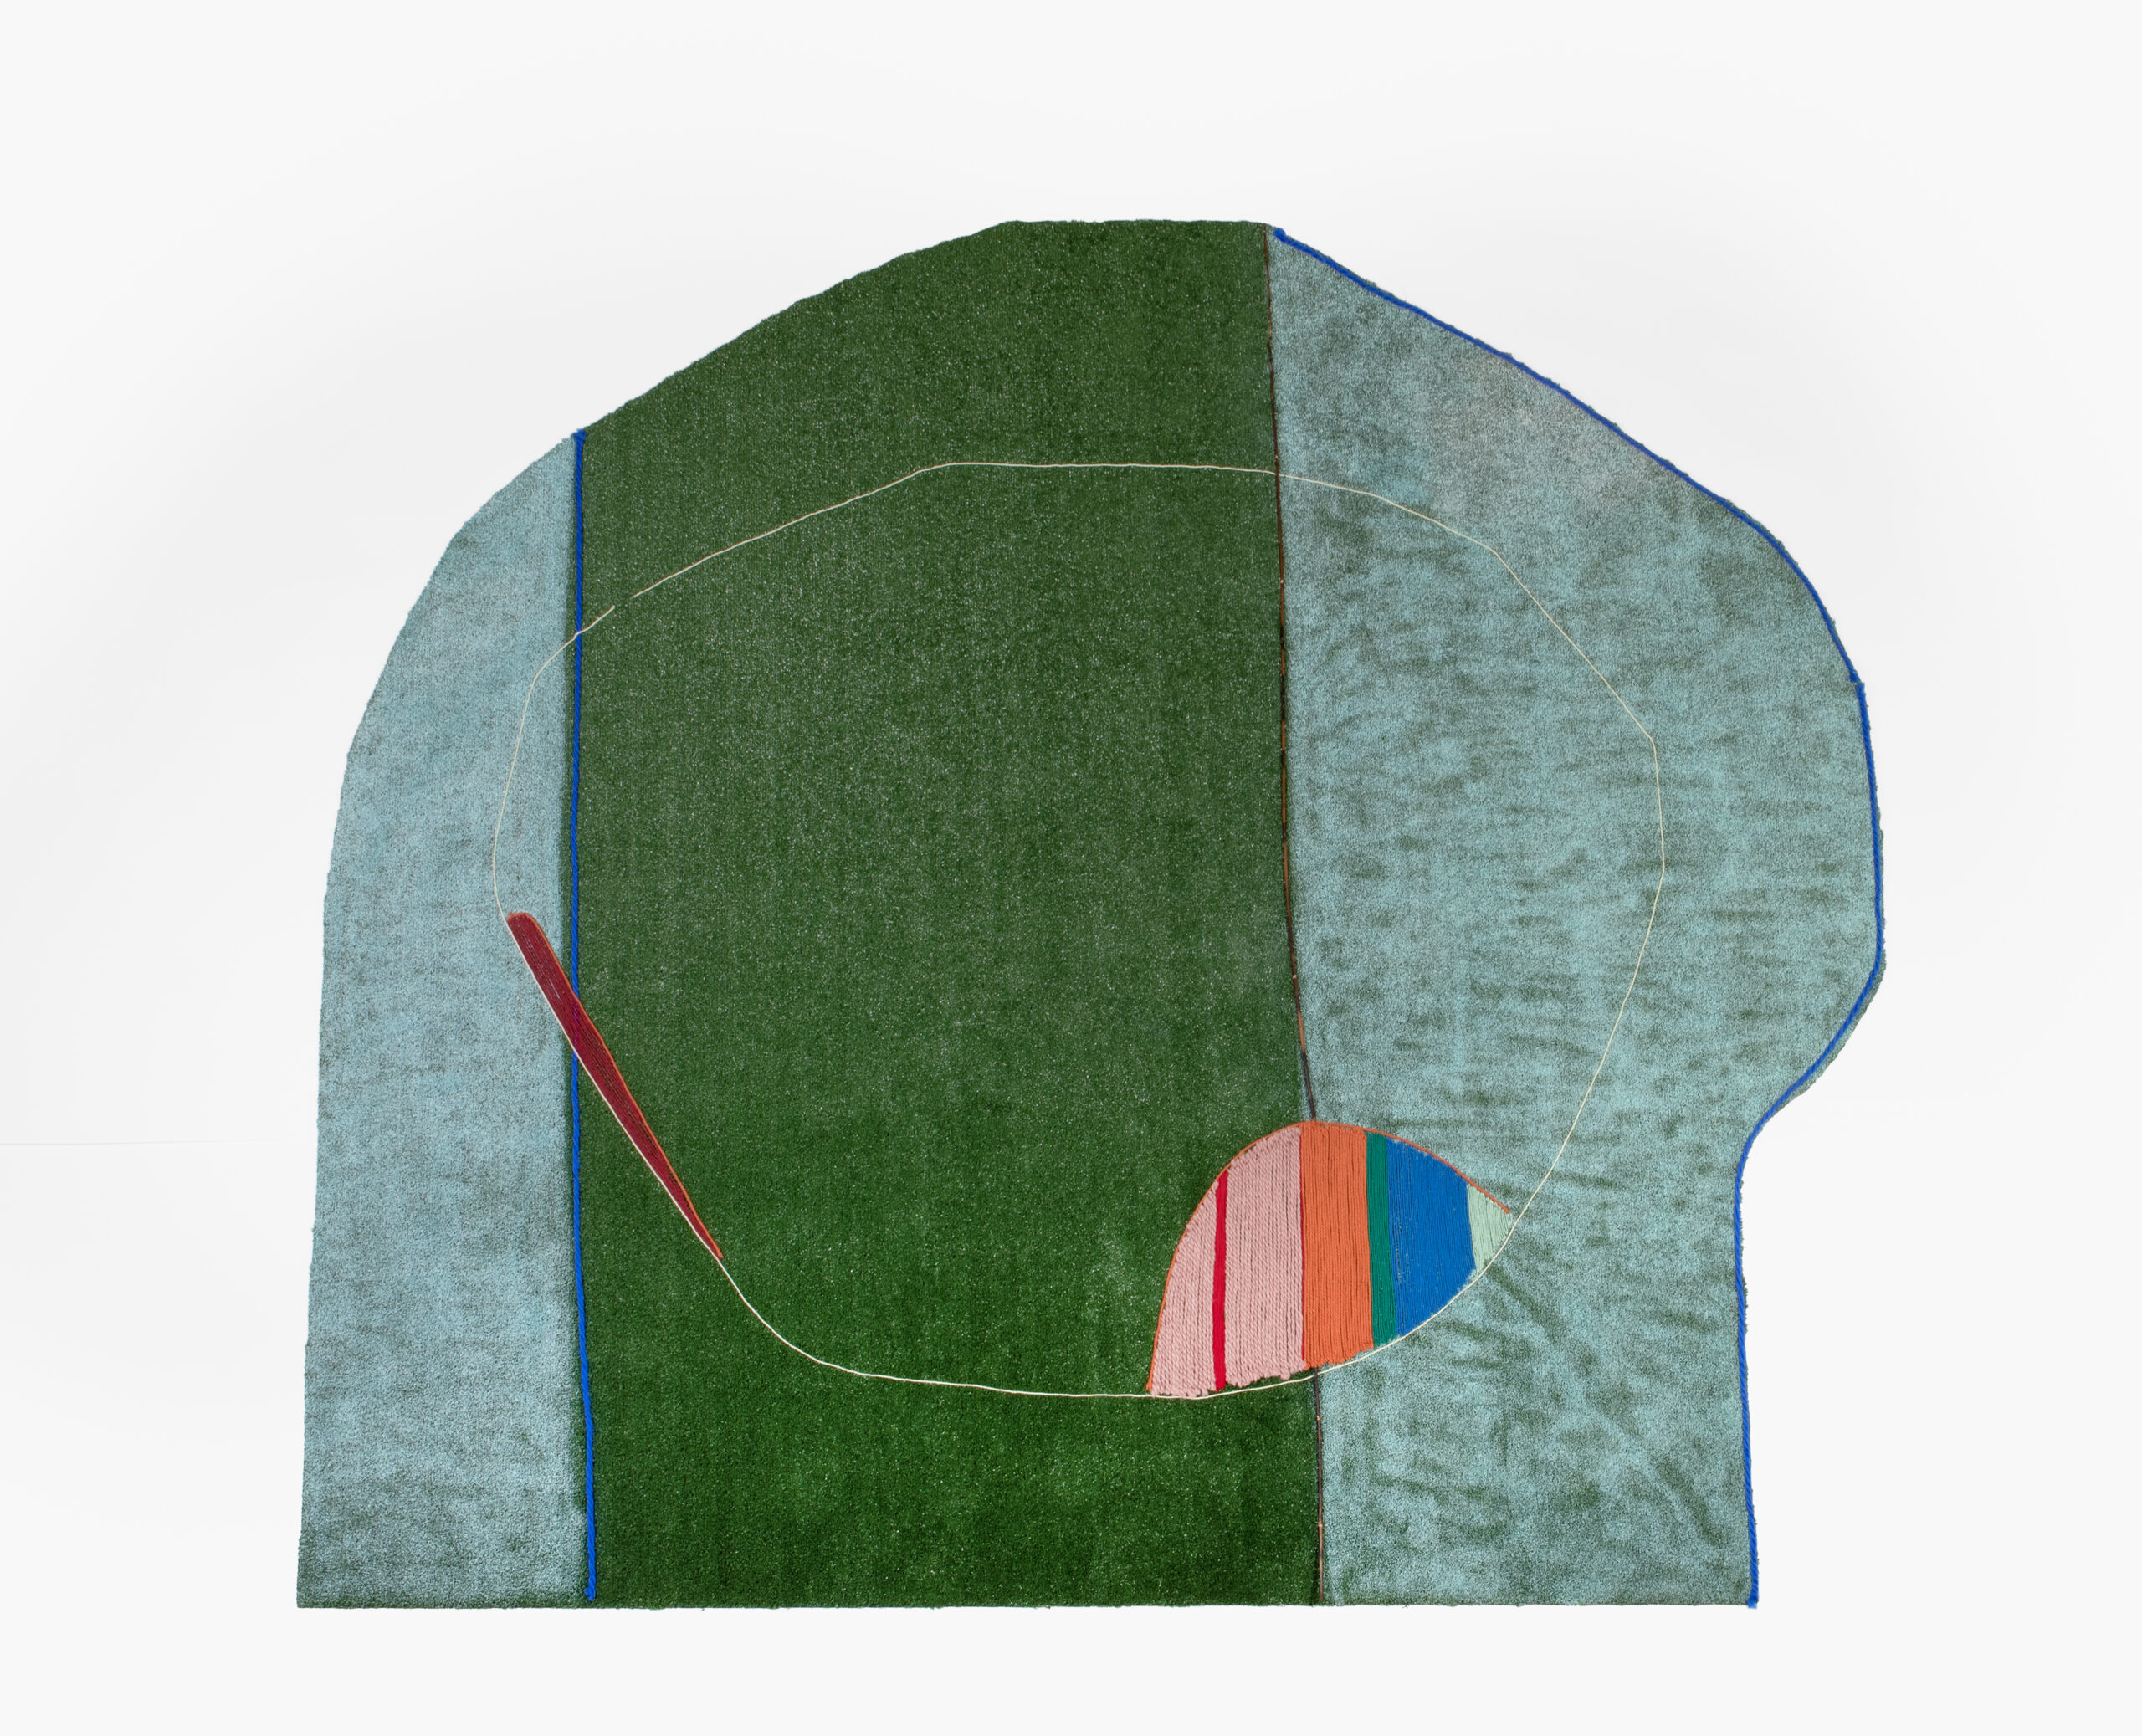 
		                					Teresa Baker		                																	
																											<i>On a Slant Village (private collection),</i>  
																																								2022, 
																																								spray paint, yarn, and willow on astroturf , 
																																								spray paint, yarn, and wi102 x 112 1/2 inches 
																								
		                				